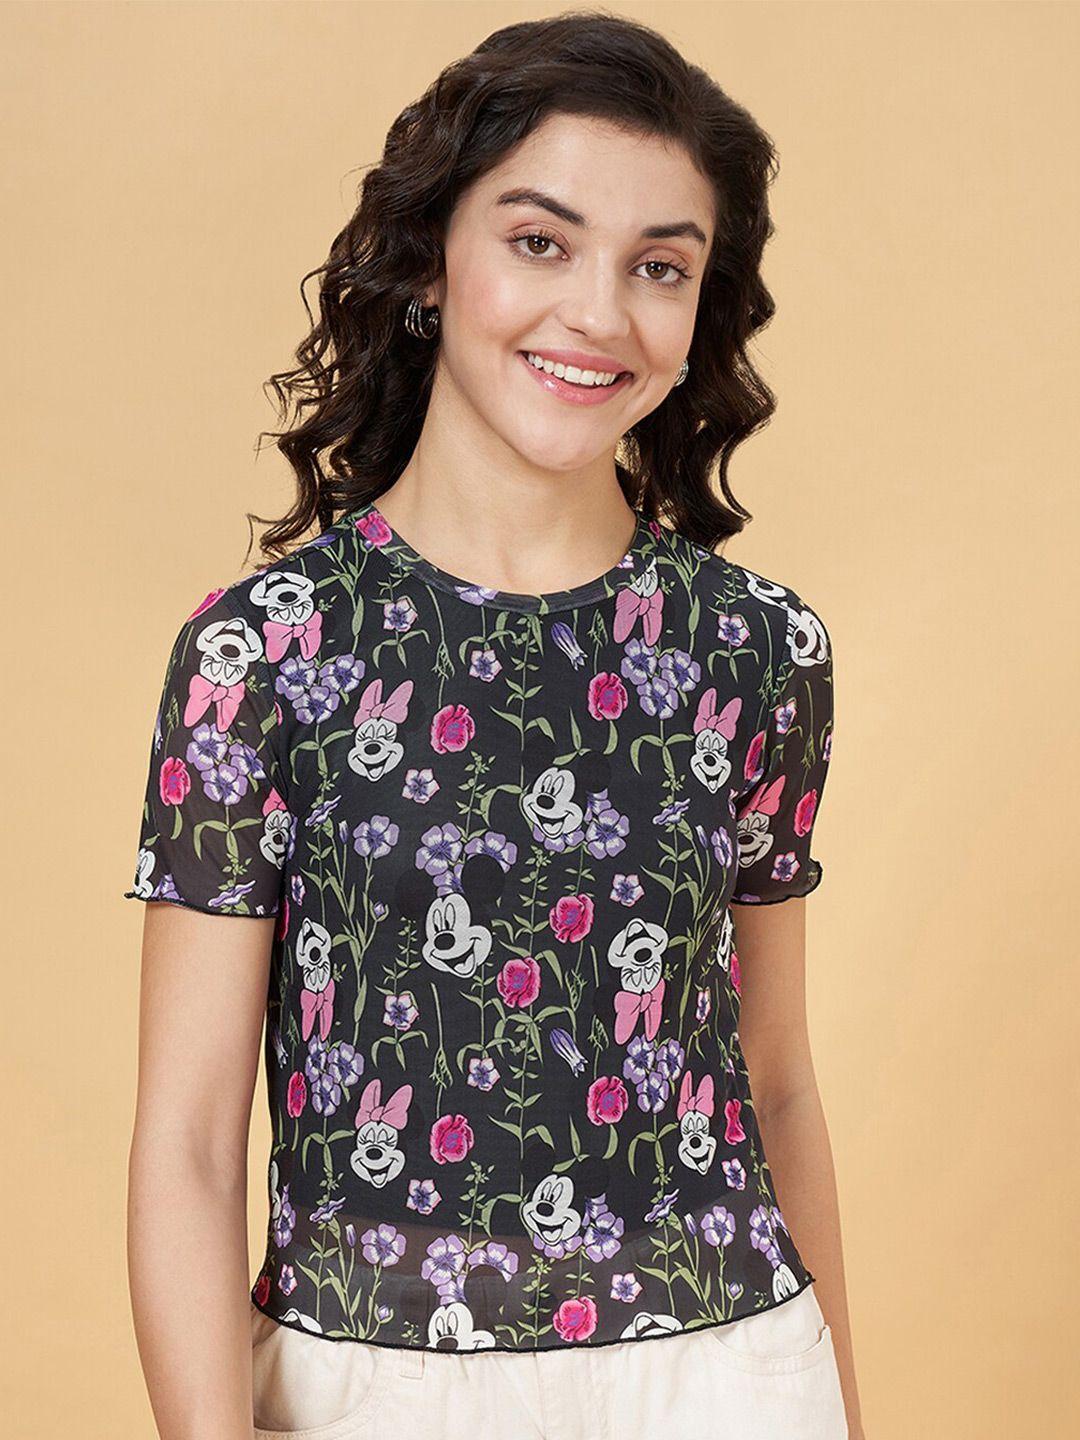 honey by pantaloons floral printed round neck top